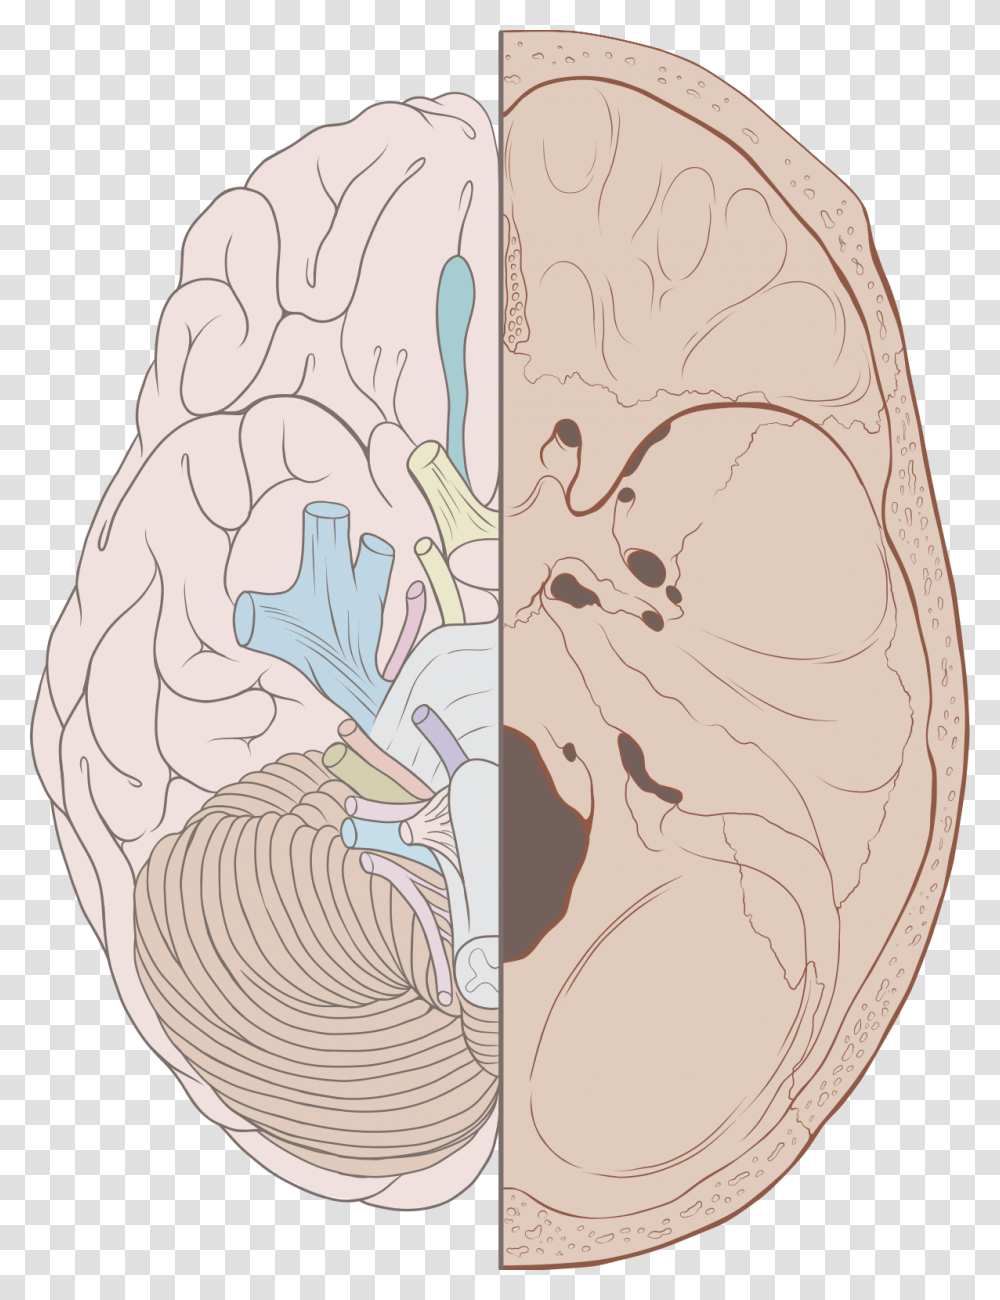 Cranial Nerves On Brain And Skull, Skin, Sphere, Wood, Astronomy Transparent Png